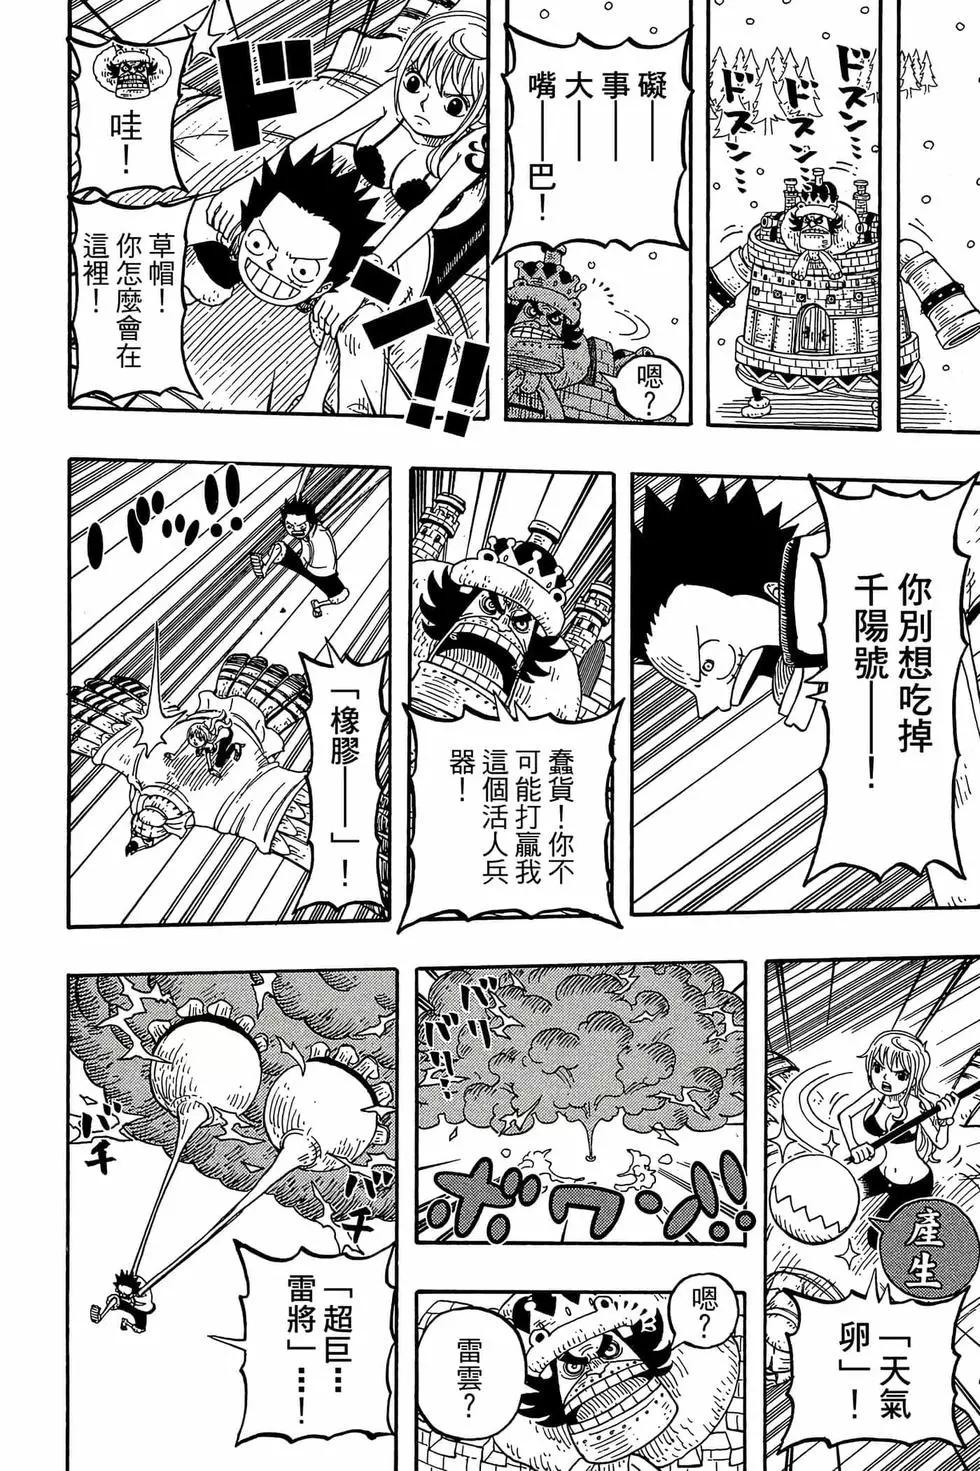 One piece party - 第03卷(1/4) - 1